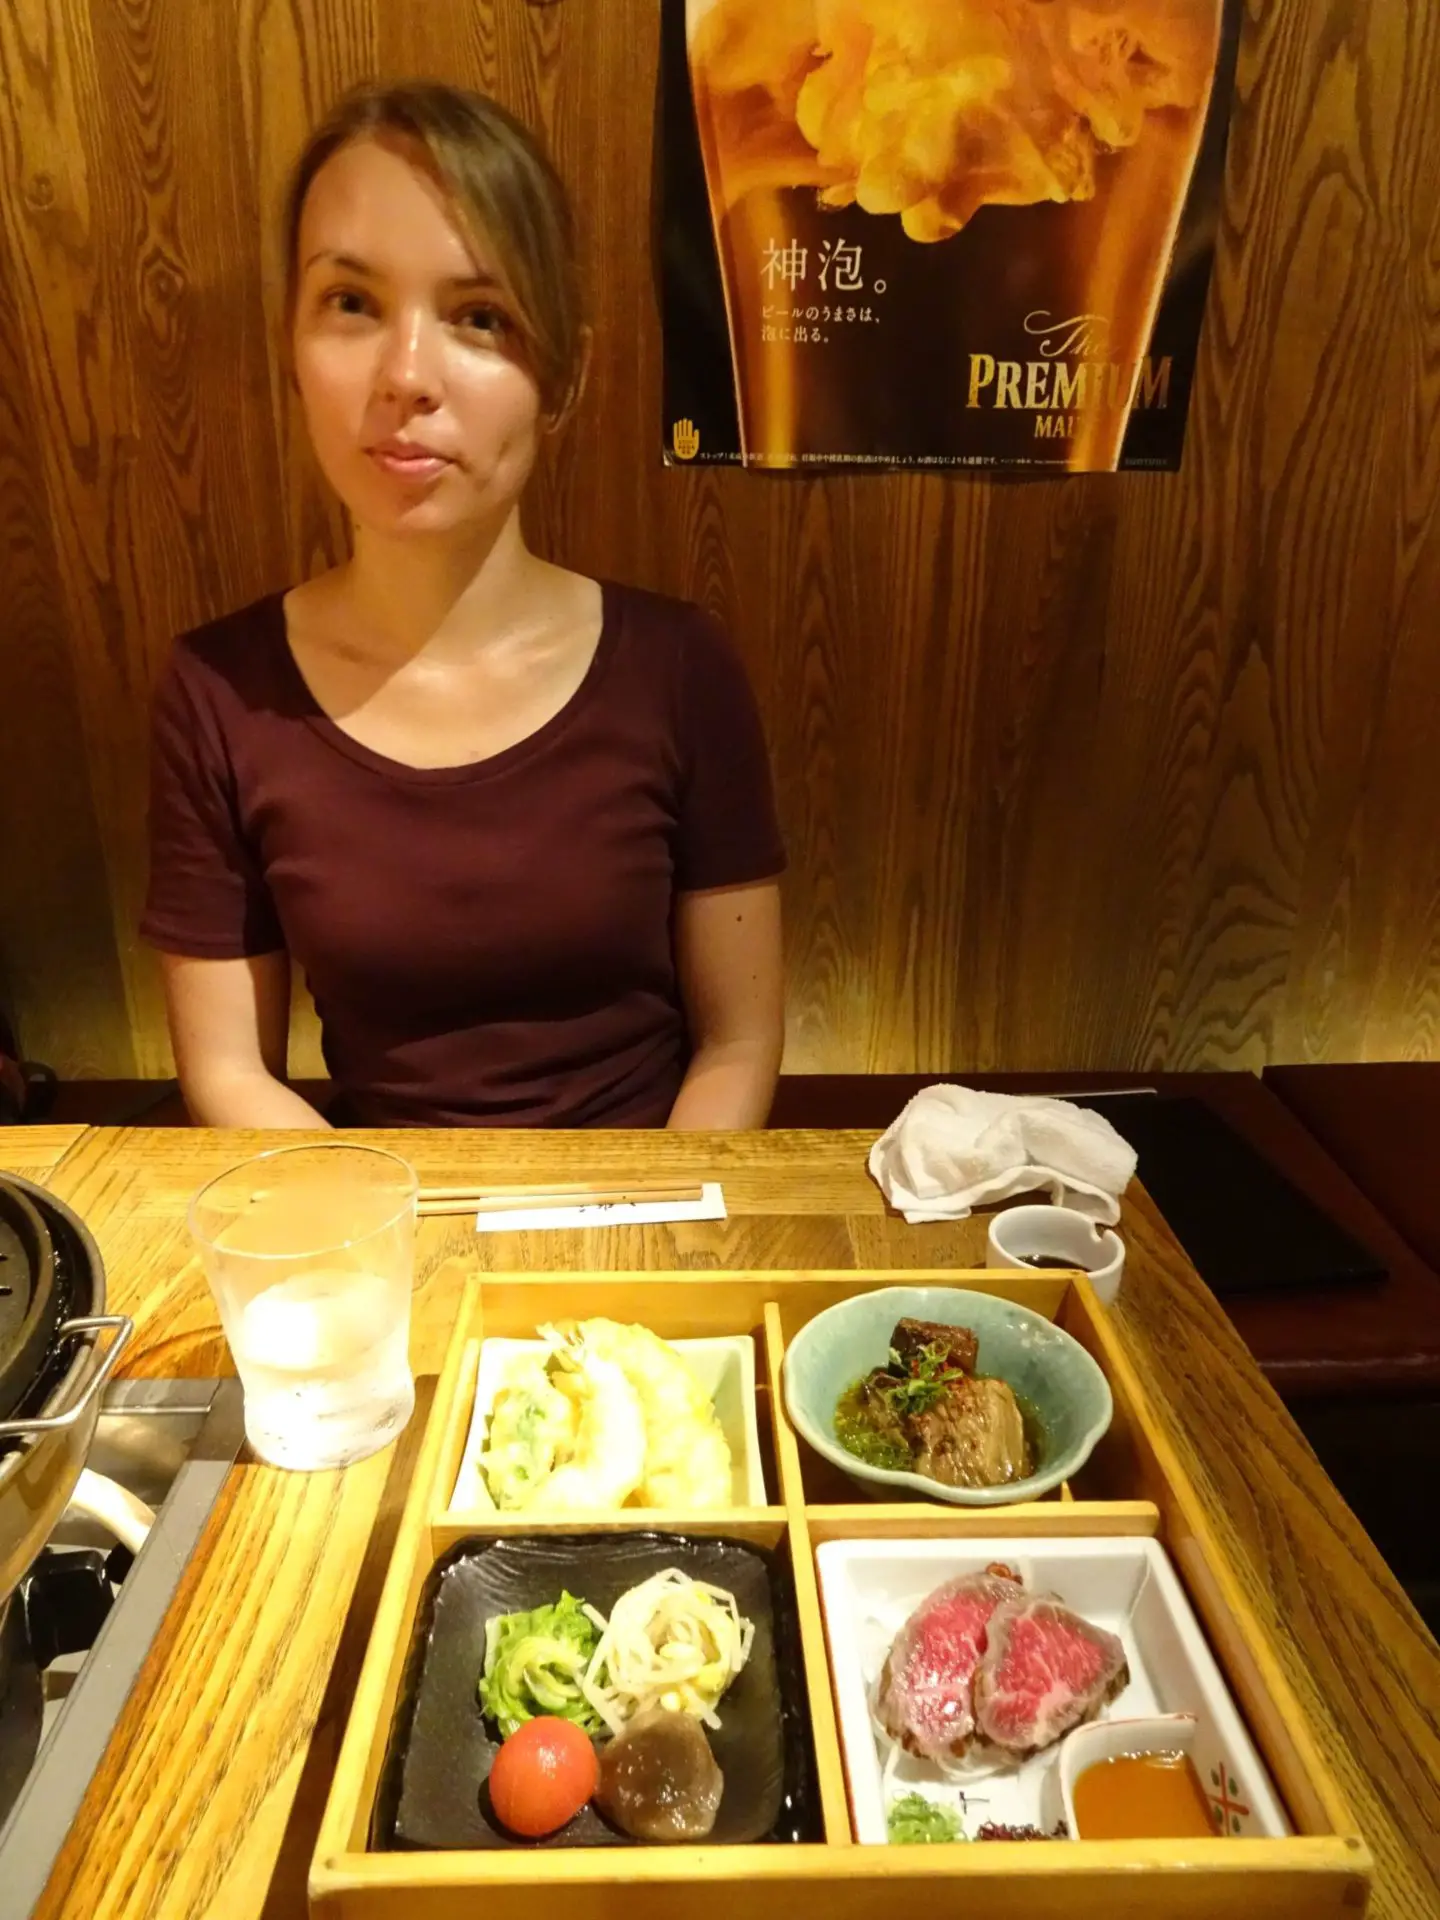 A girl sitting in front of a plate Kobe Beef